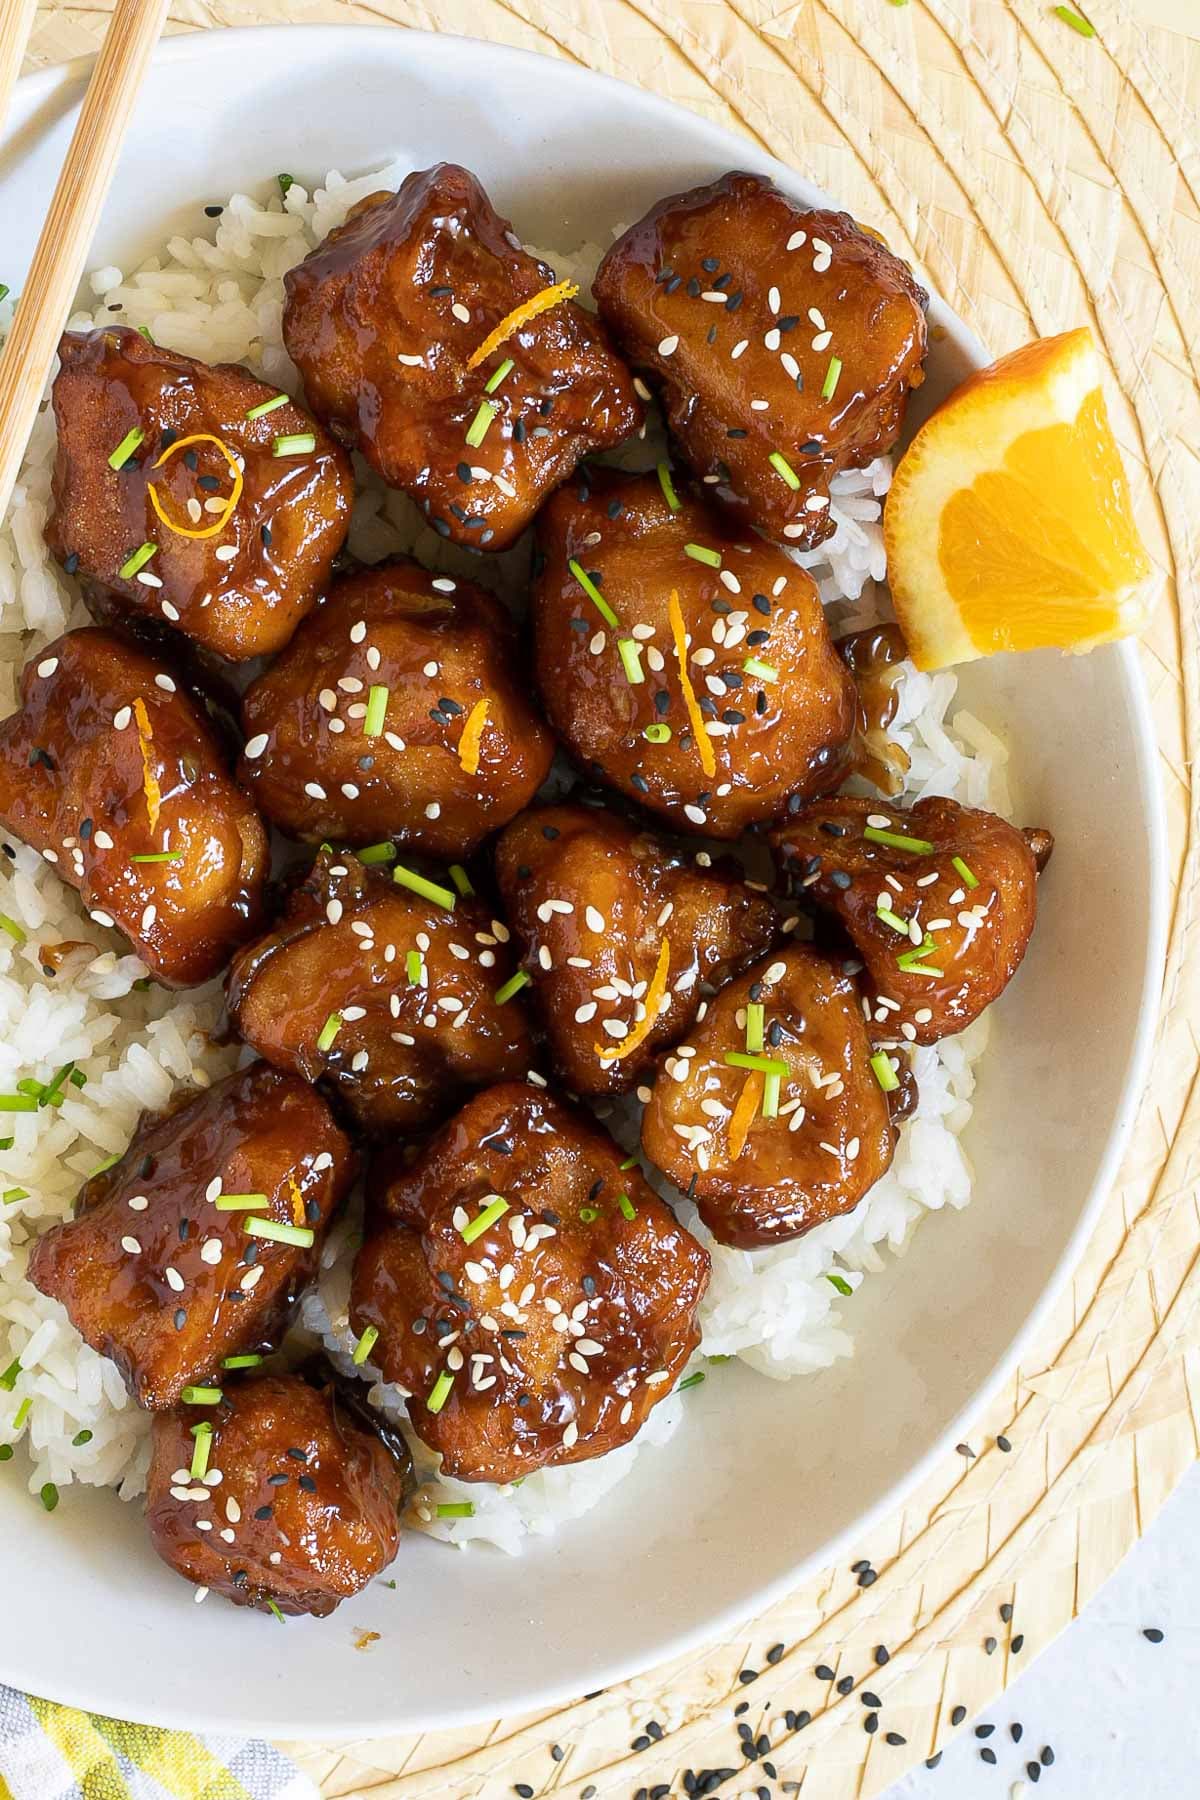 Sticky brown breaded cauliflower florets are served on top of rice in a white bowl. It is sprinkled with chopped chives and sesame seeds.